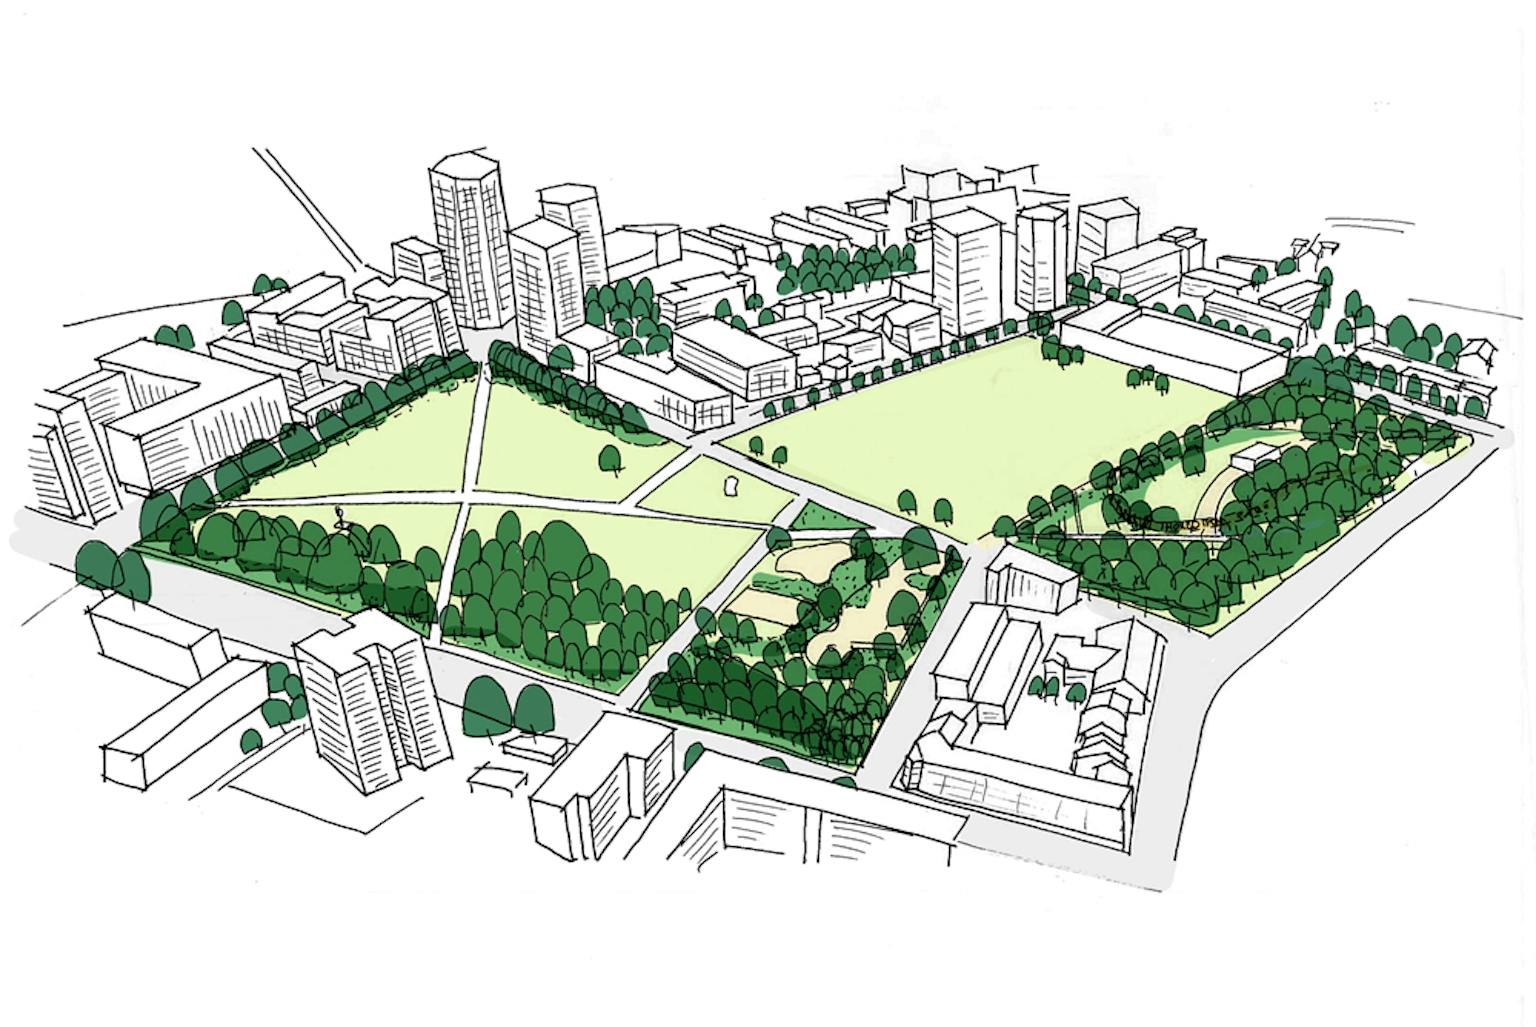 Sketch of Shoreditch Park by LUC